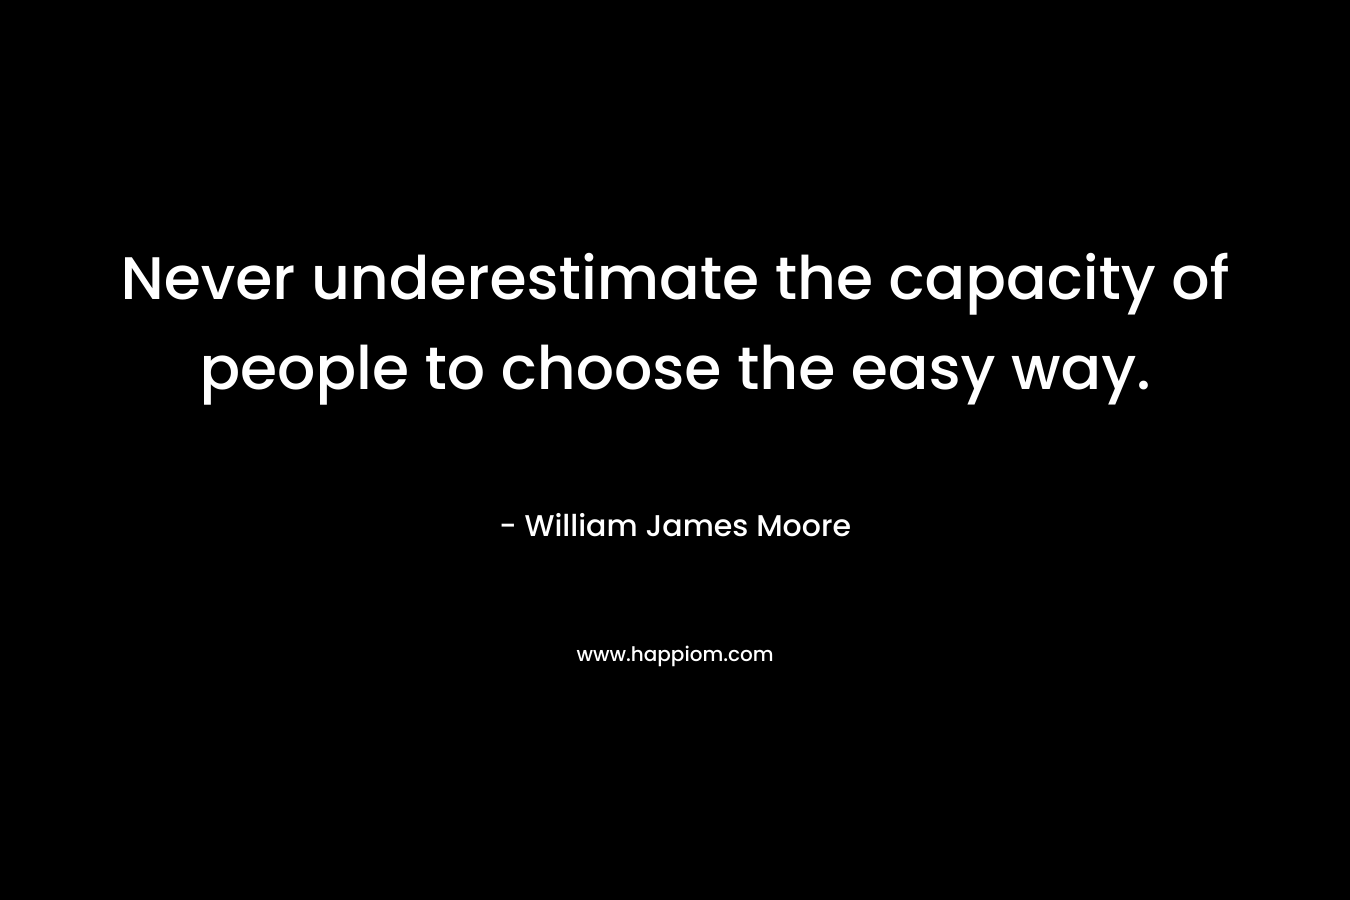 Never underestimate the capacity of people to choose the easy way. – William James Moore